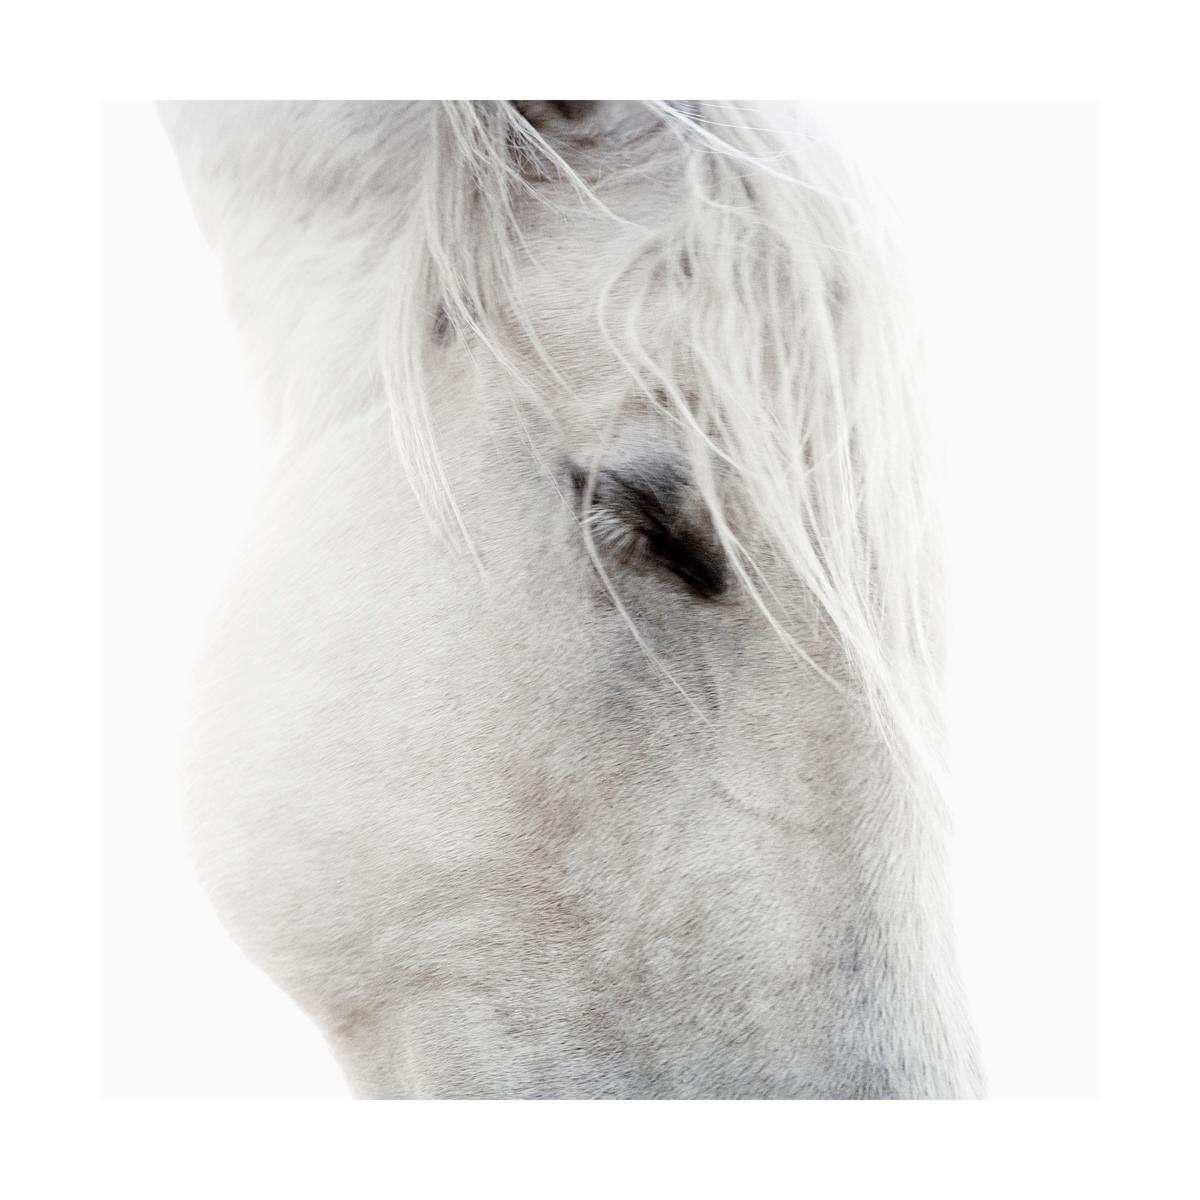 Silver by Phillip Graybill, Horse Photography